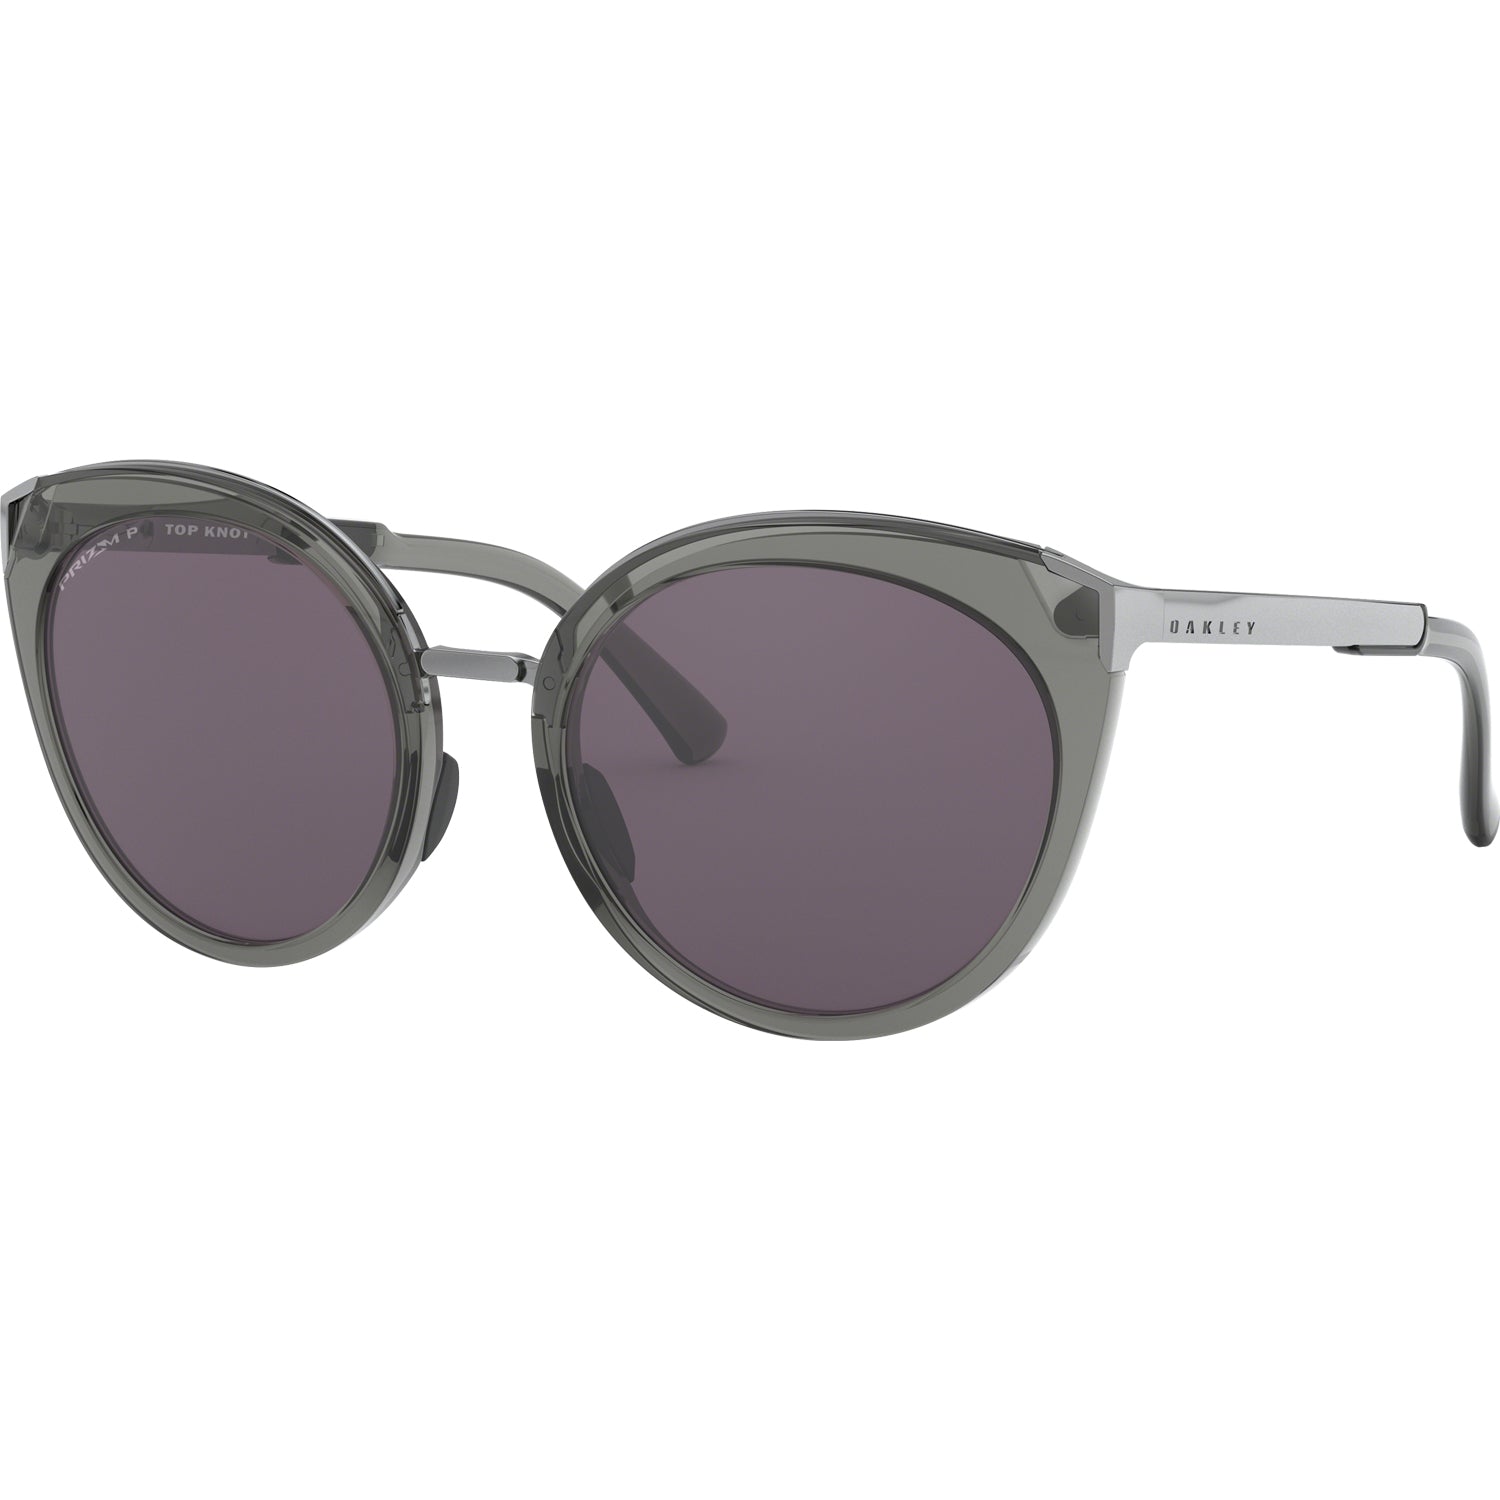 Oakley Top Knot Sunglasses - Buy Now 